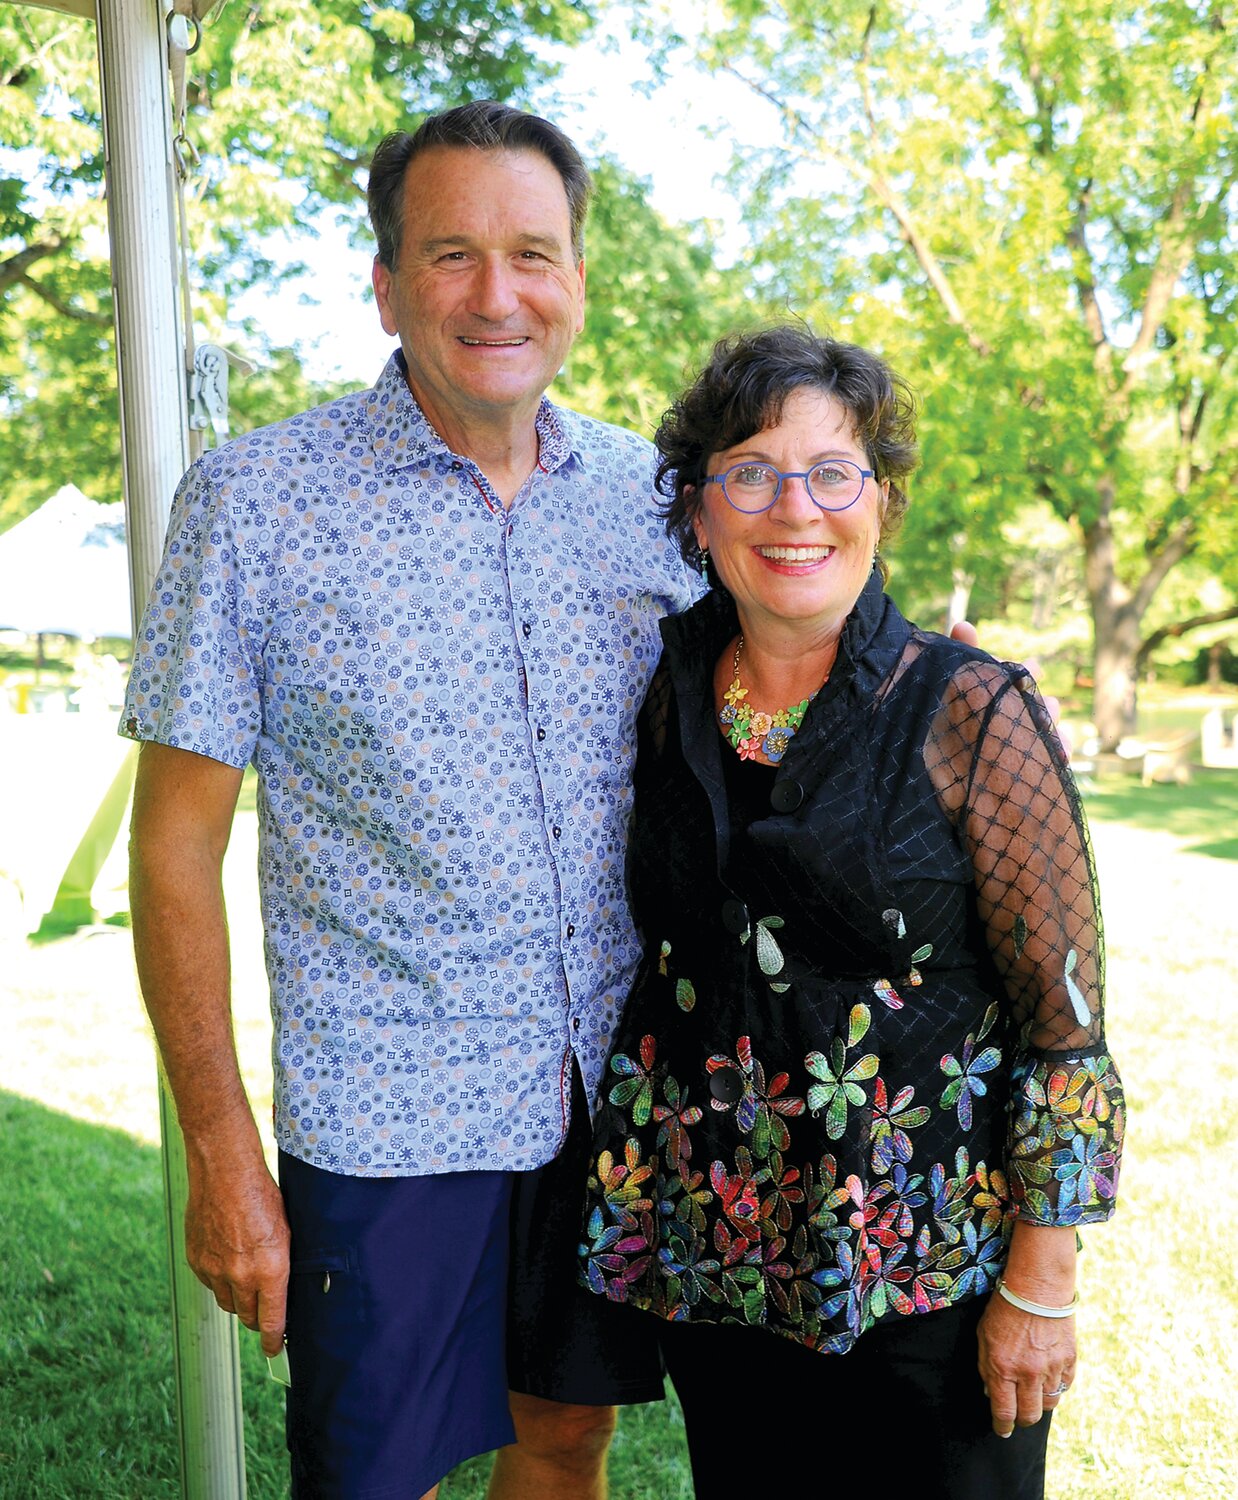 Jeff and Bev Fulgham hosted the event at their home, Happiness Farm.